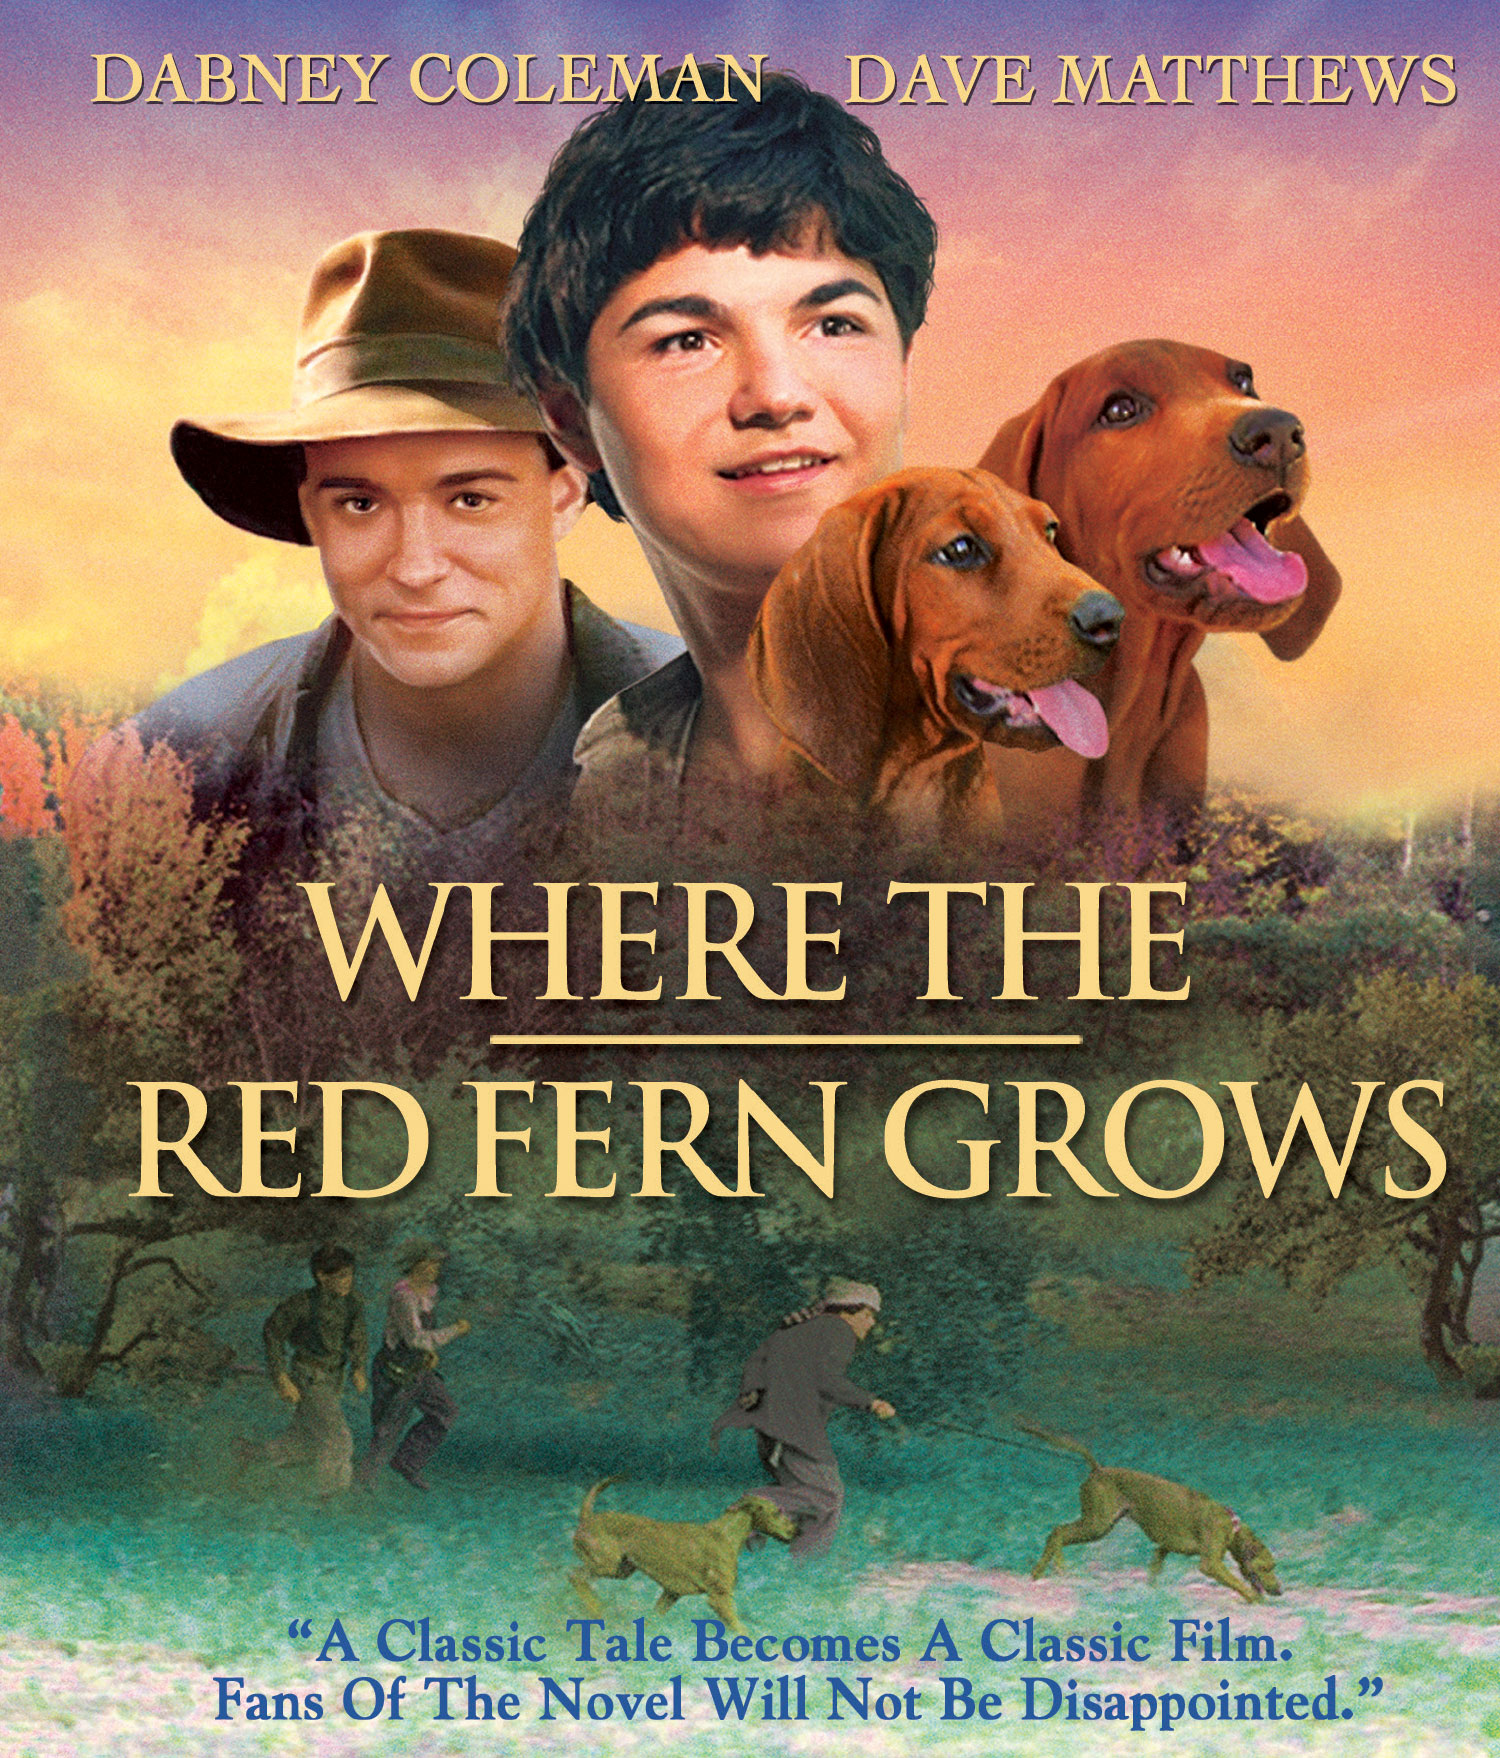 where-the-red-fern-grows-rating-where-the-red-fern-grows-movie